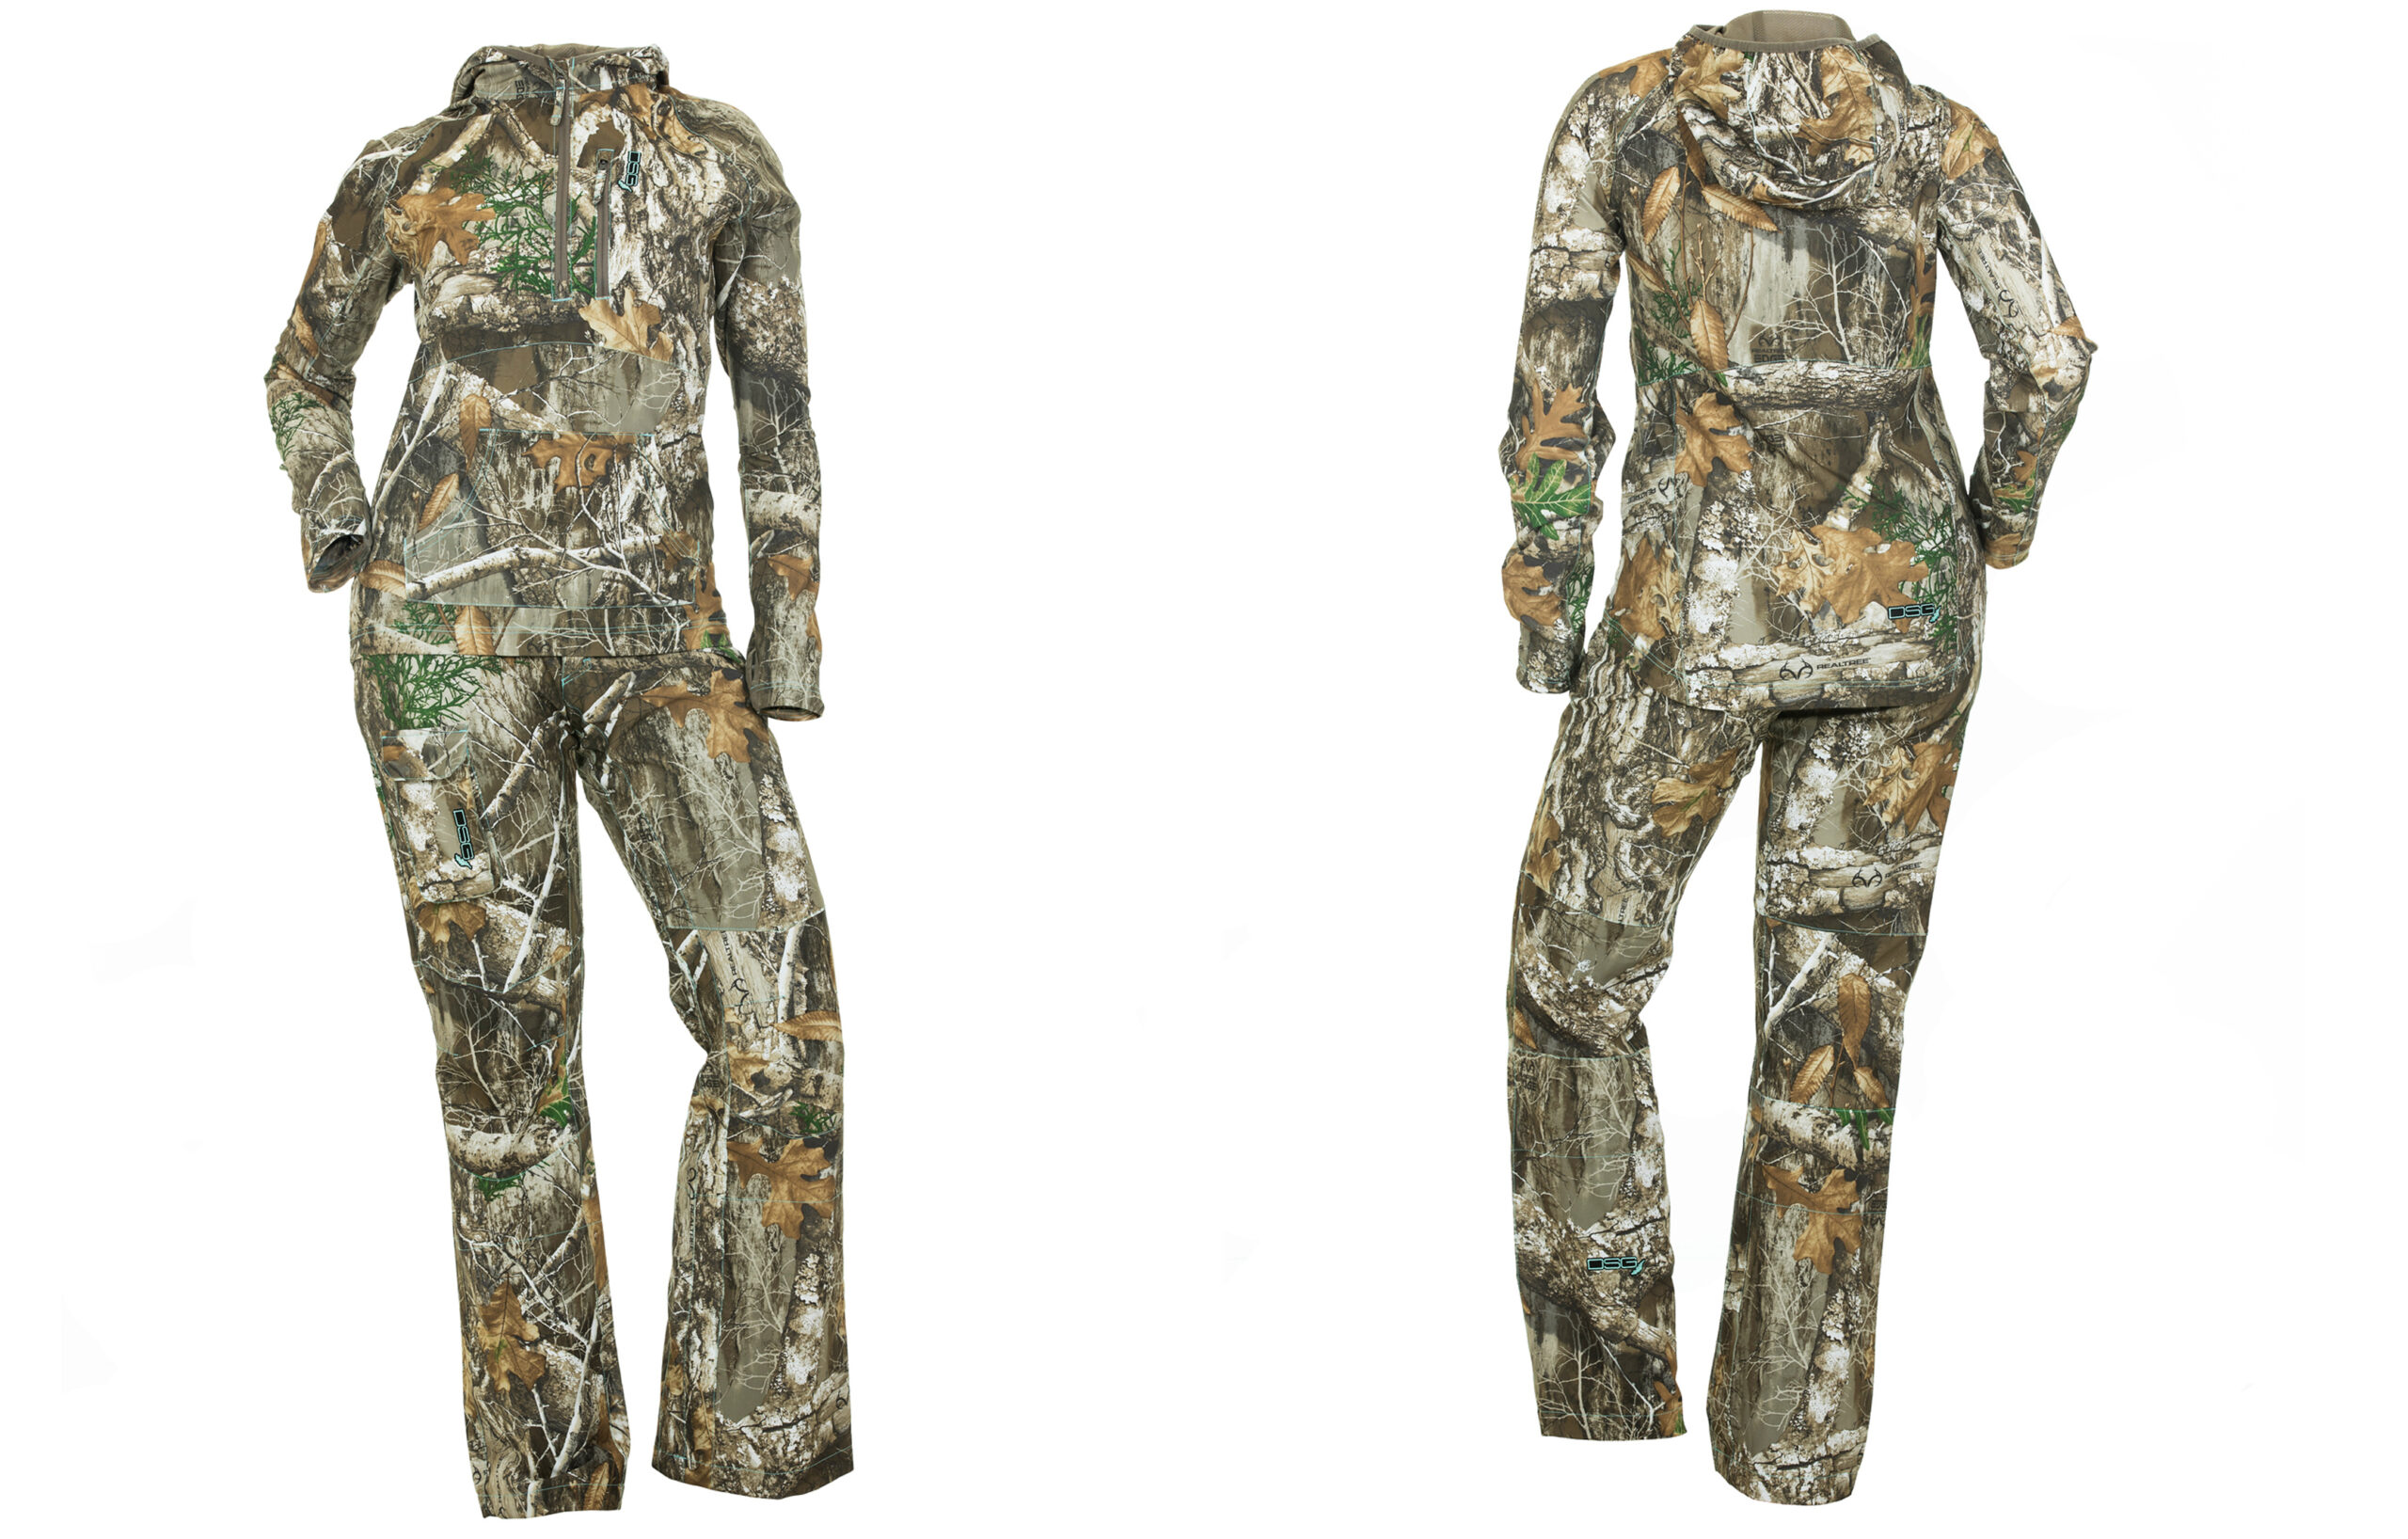 A top and bottom set of women's camo in Realtree Extra, on a white background.